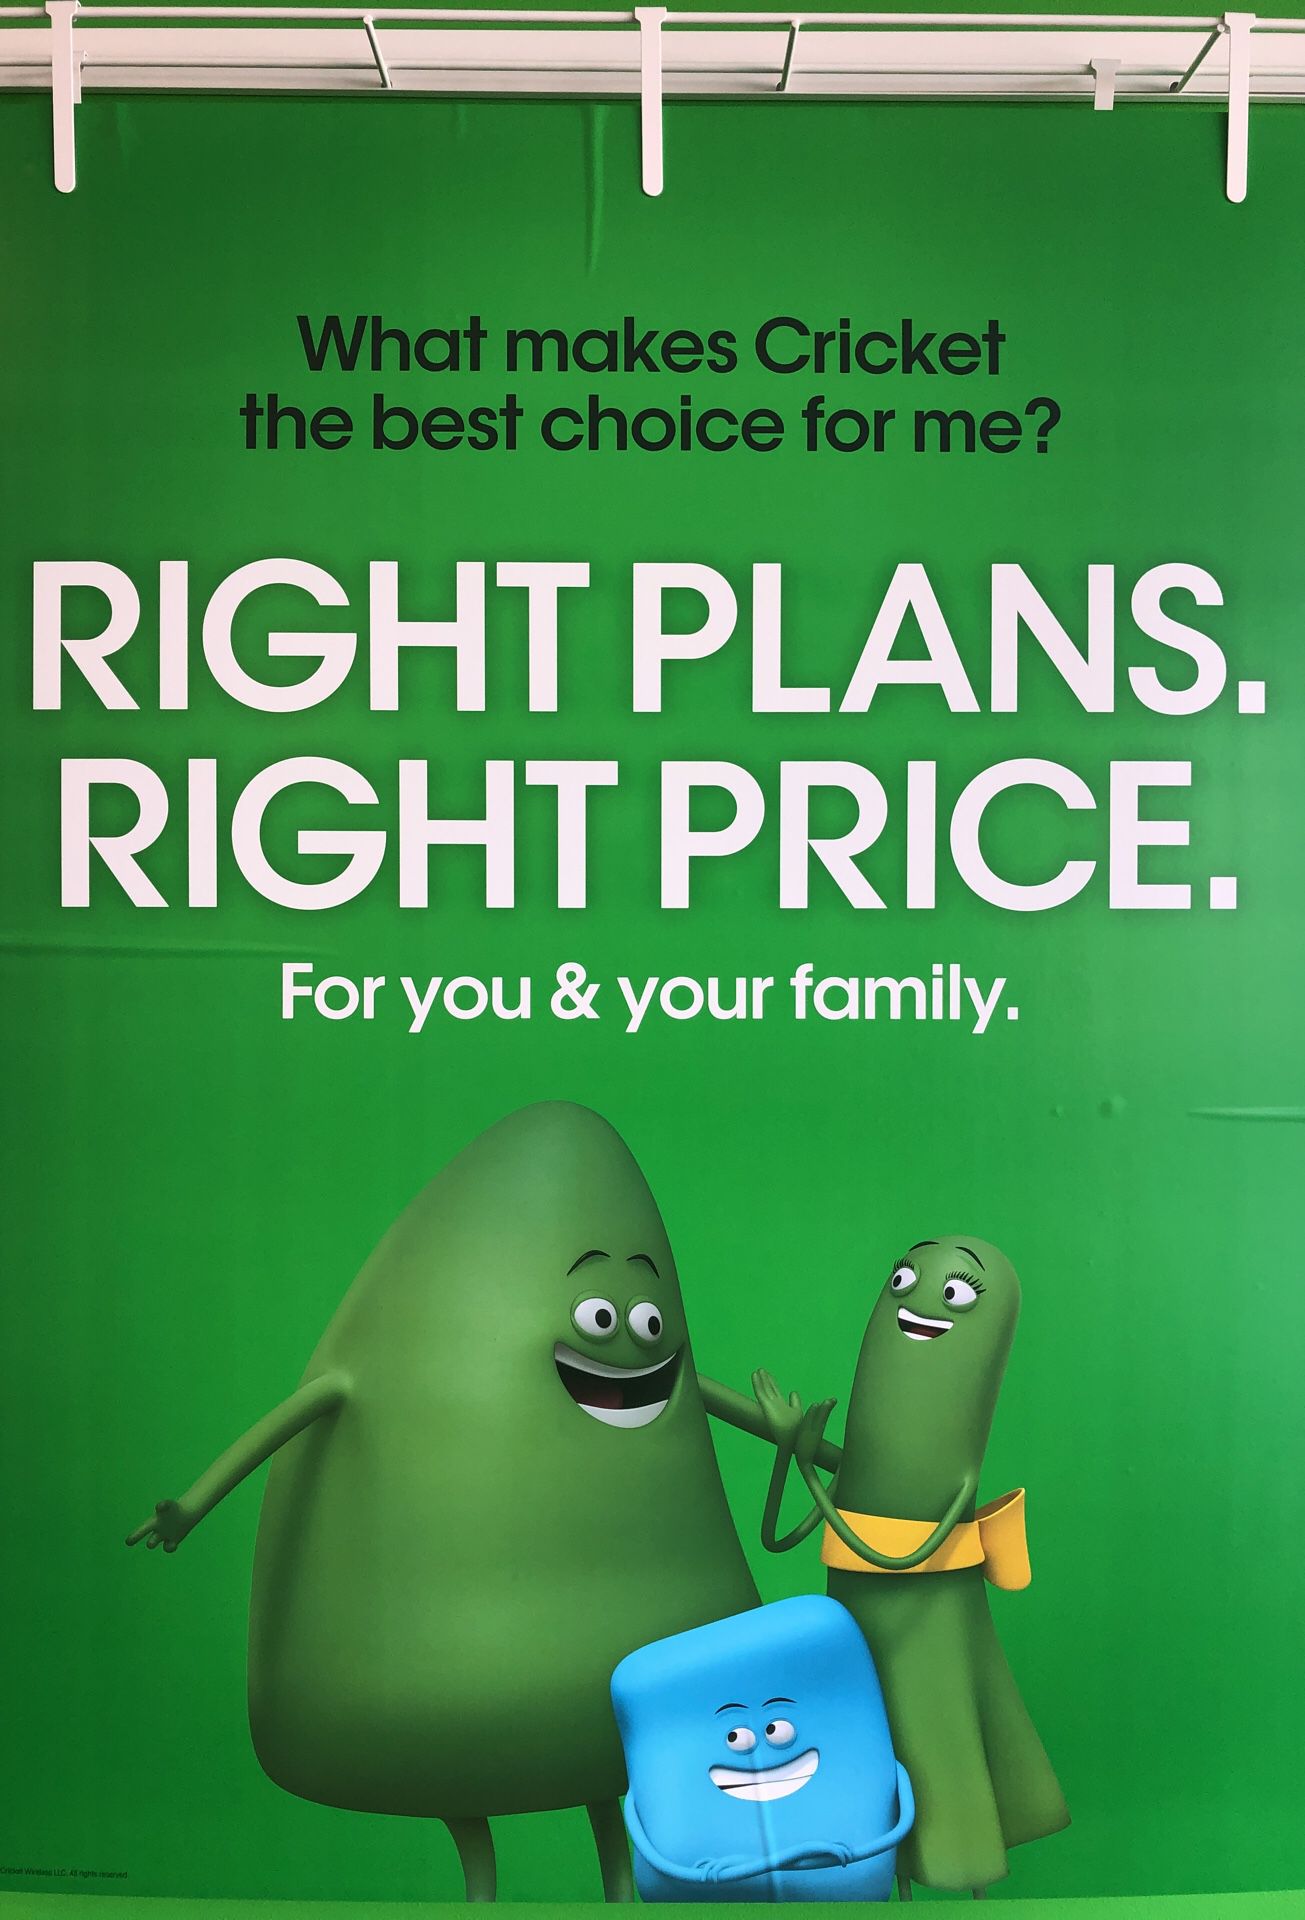 Make the switch to CRICKET. Ask us how!